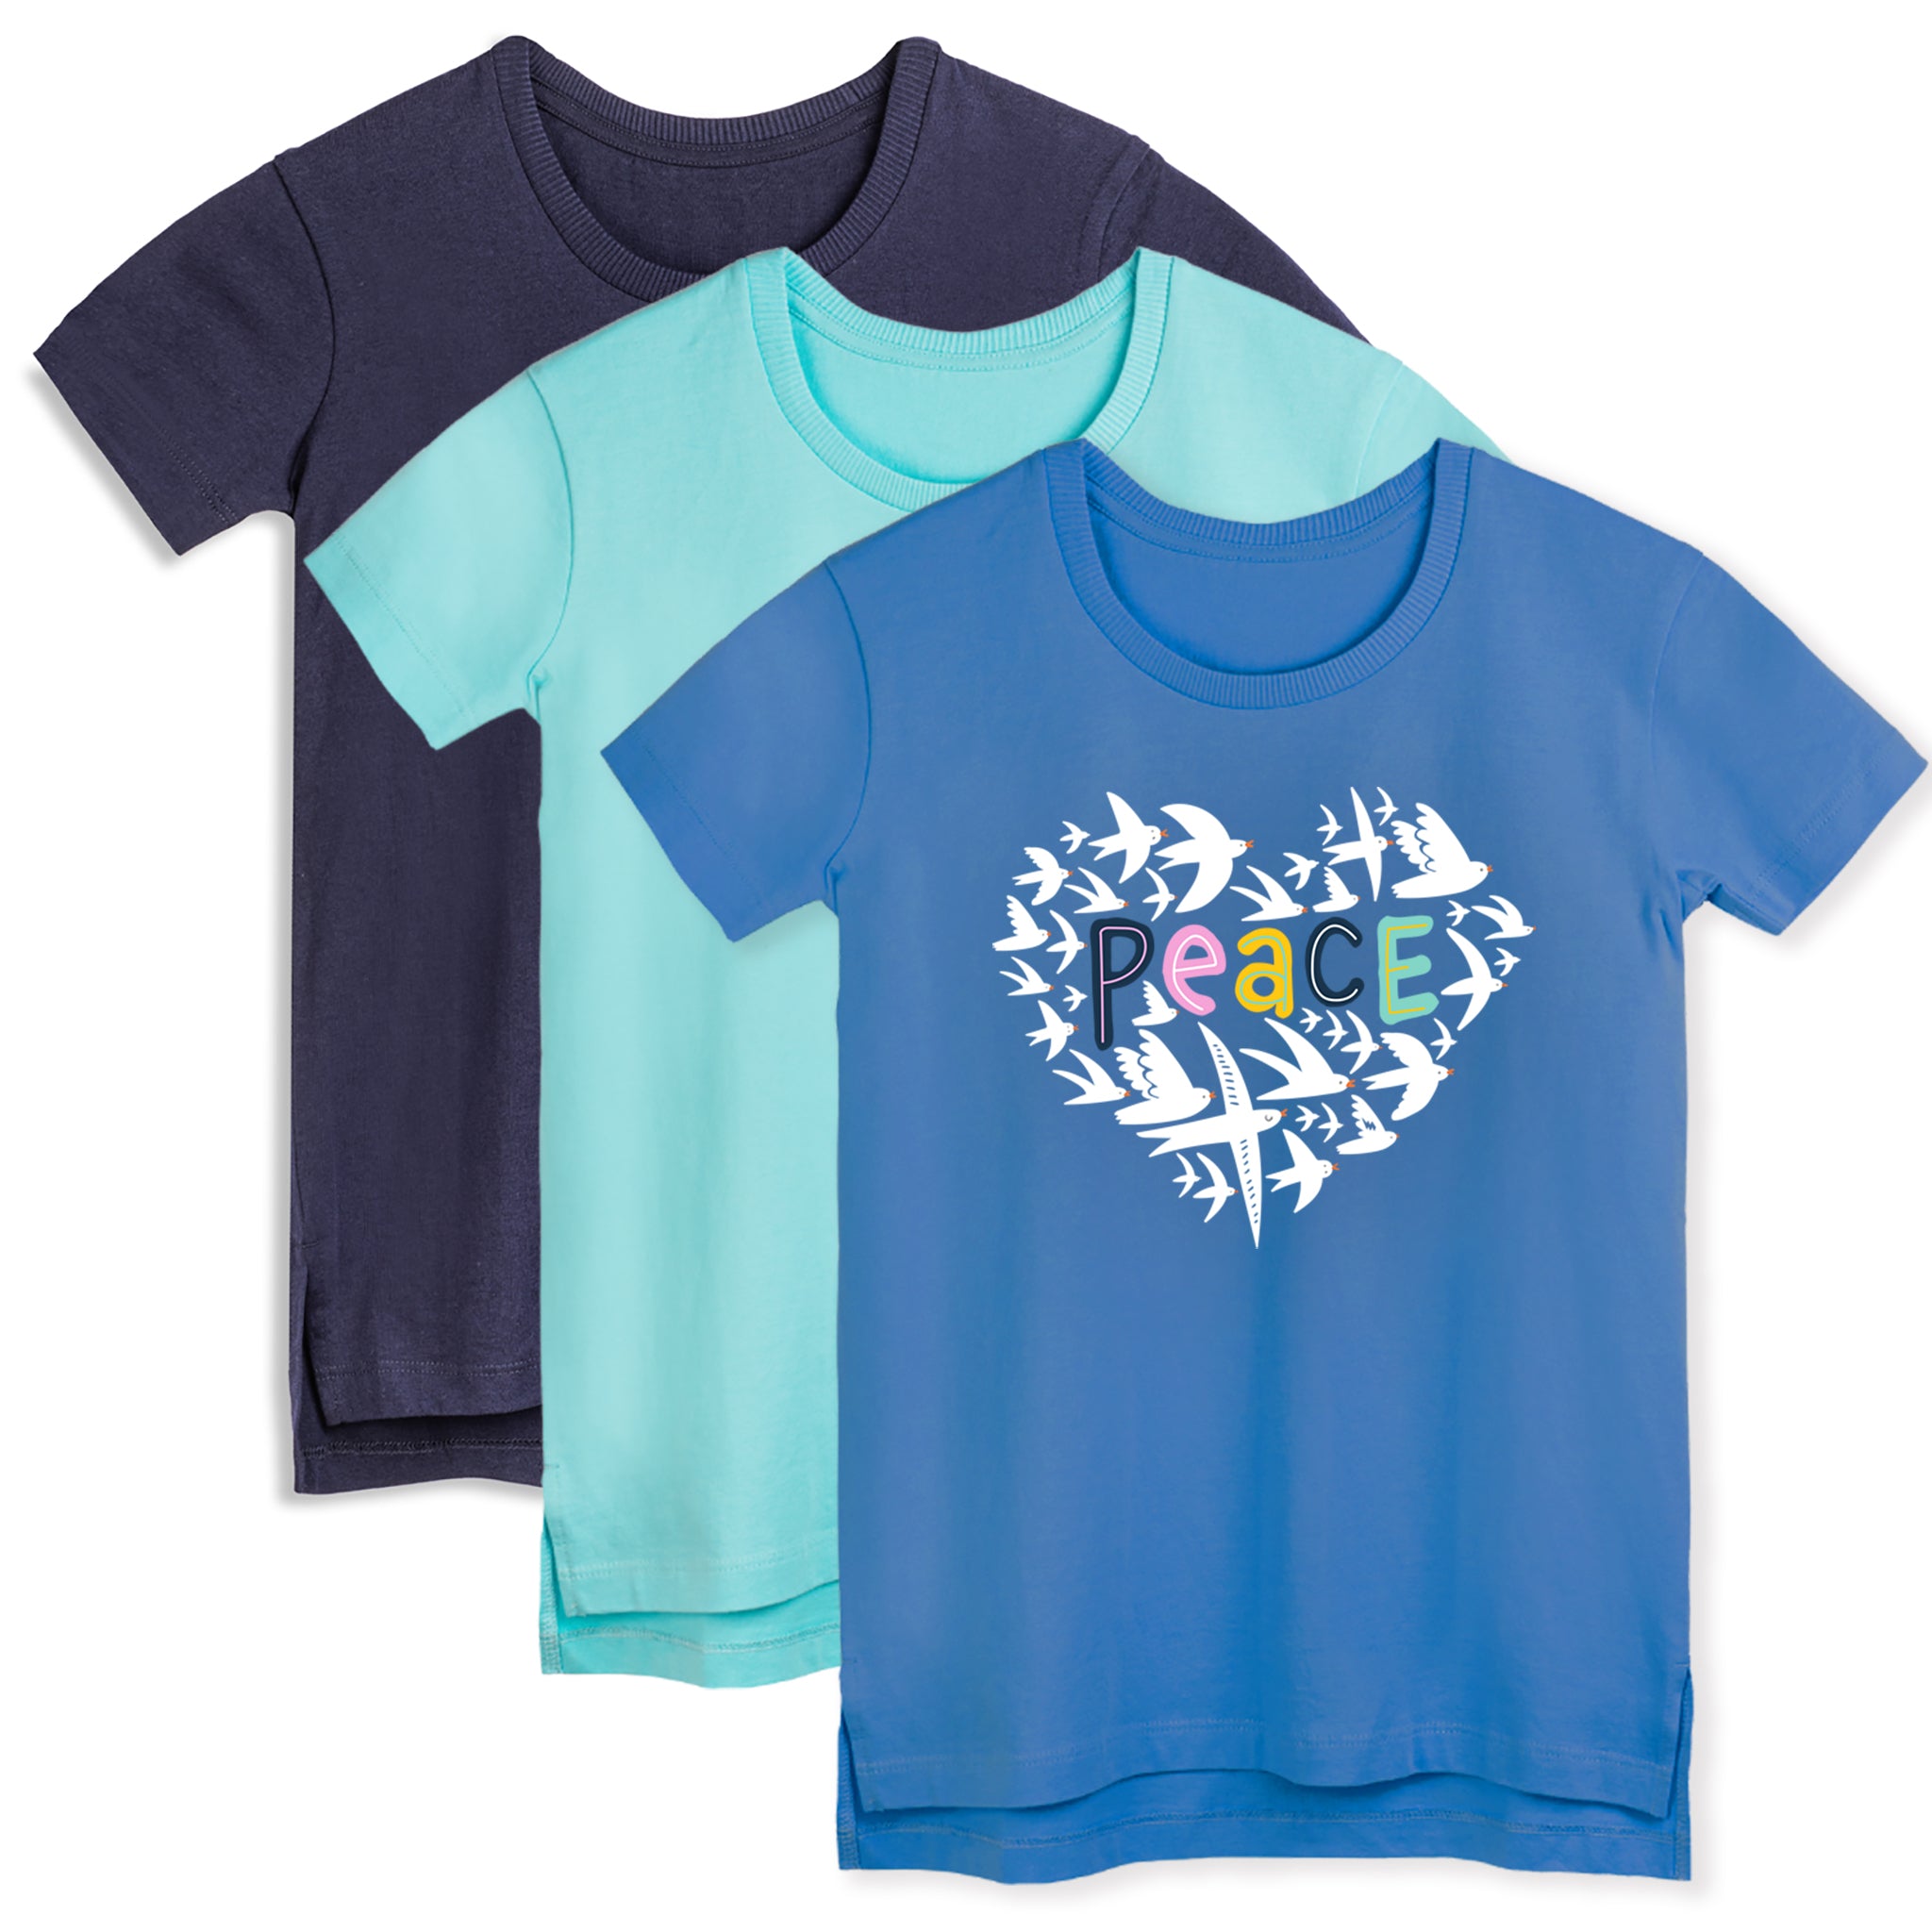 Organic Cotton Kids Shirts - Extended 3 T-Shirts Length Mightly Pack 